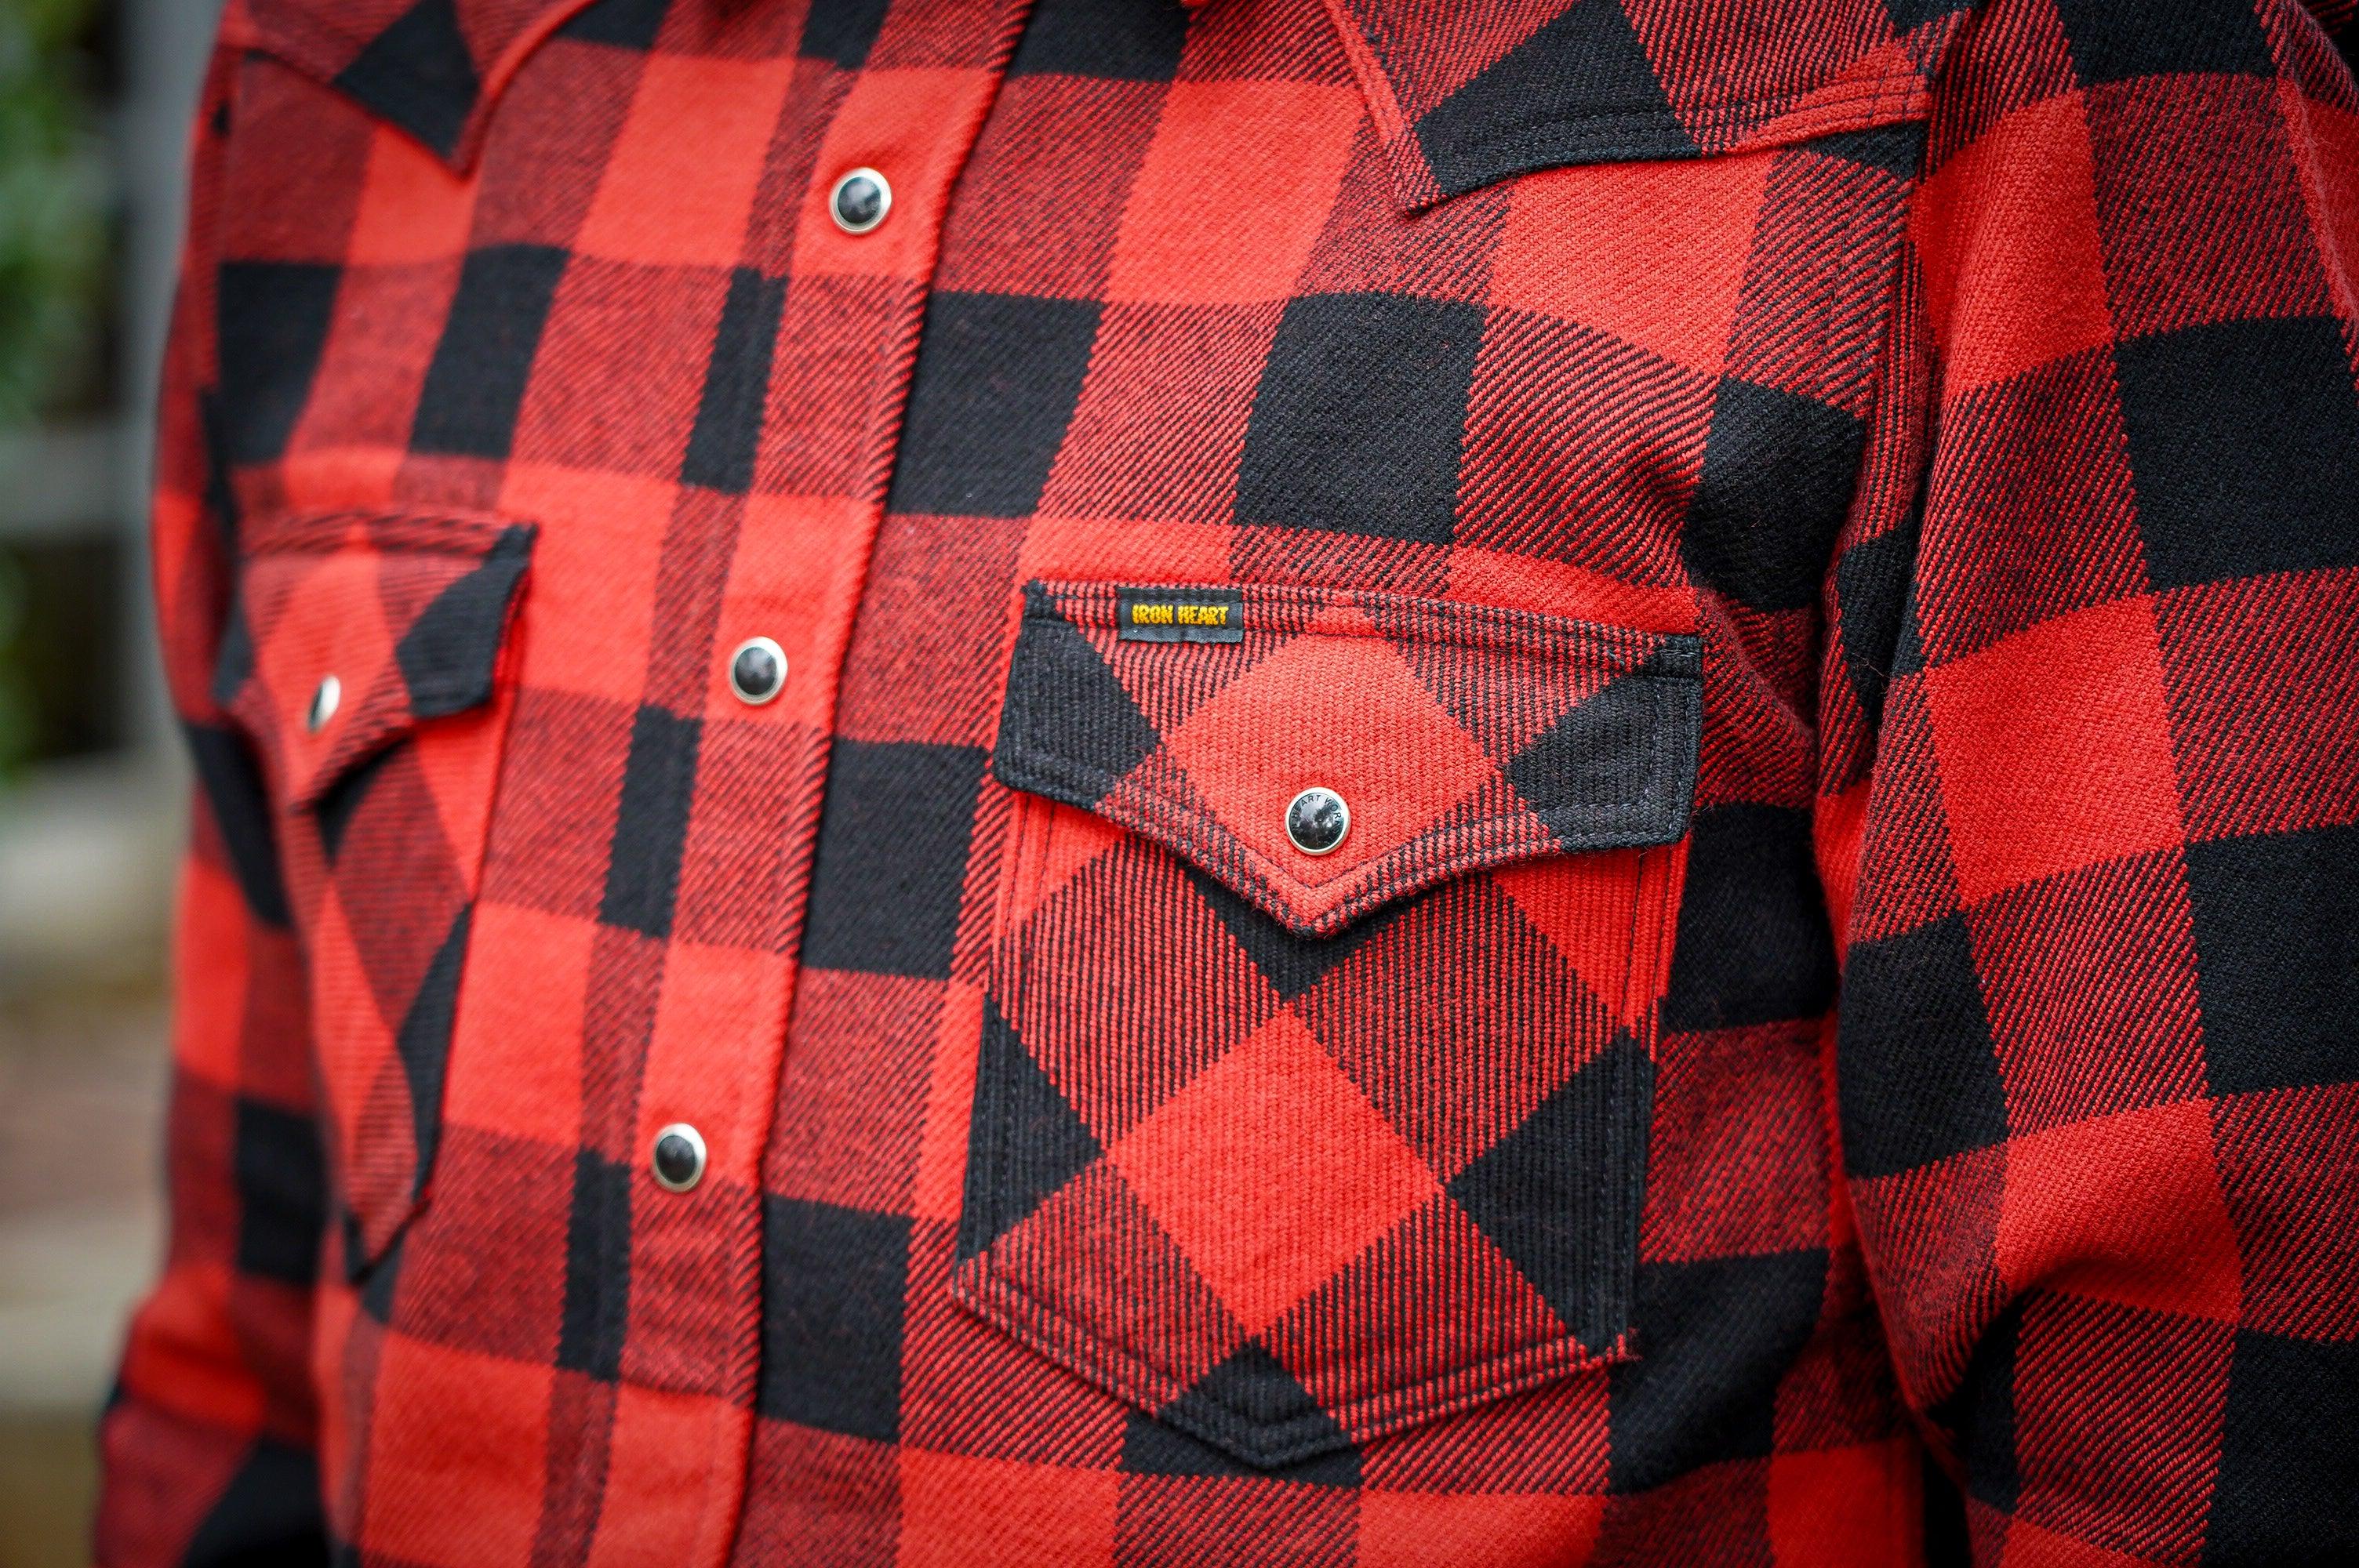 Iron Heart IHSH-232-RED Ultra Heavy Flannel Buffalo Check Western Shirt - Red/Black - Guilty Party